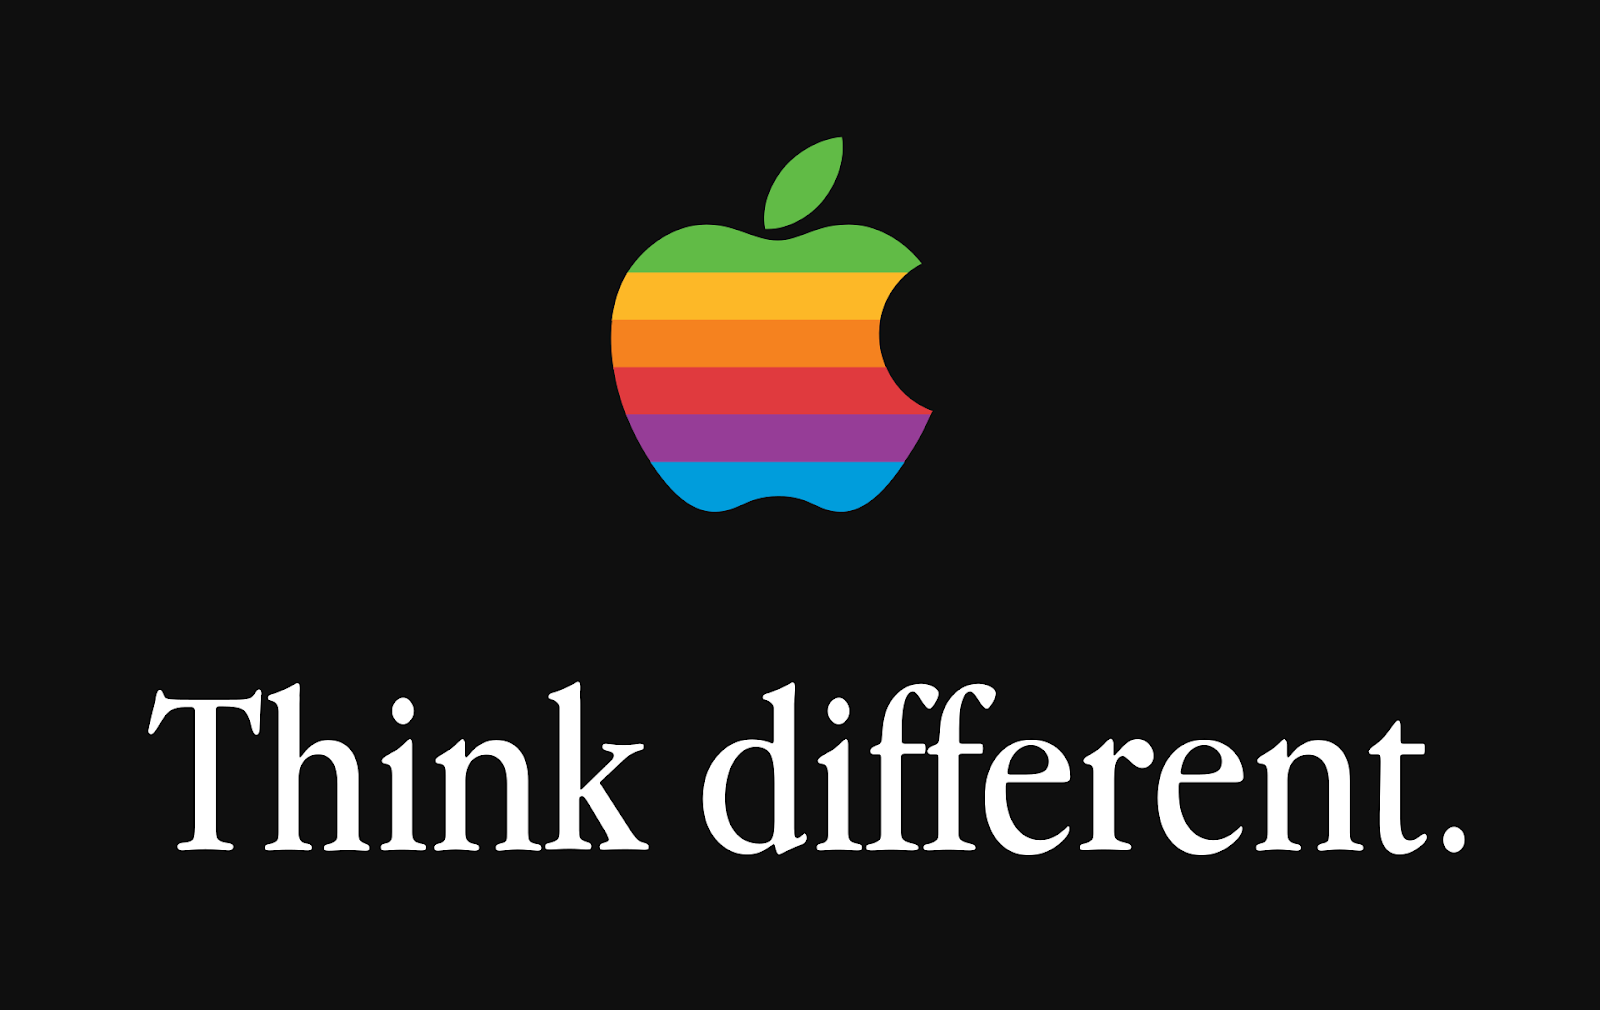 Apple's "Think different" campaign